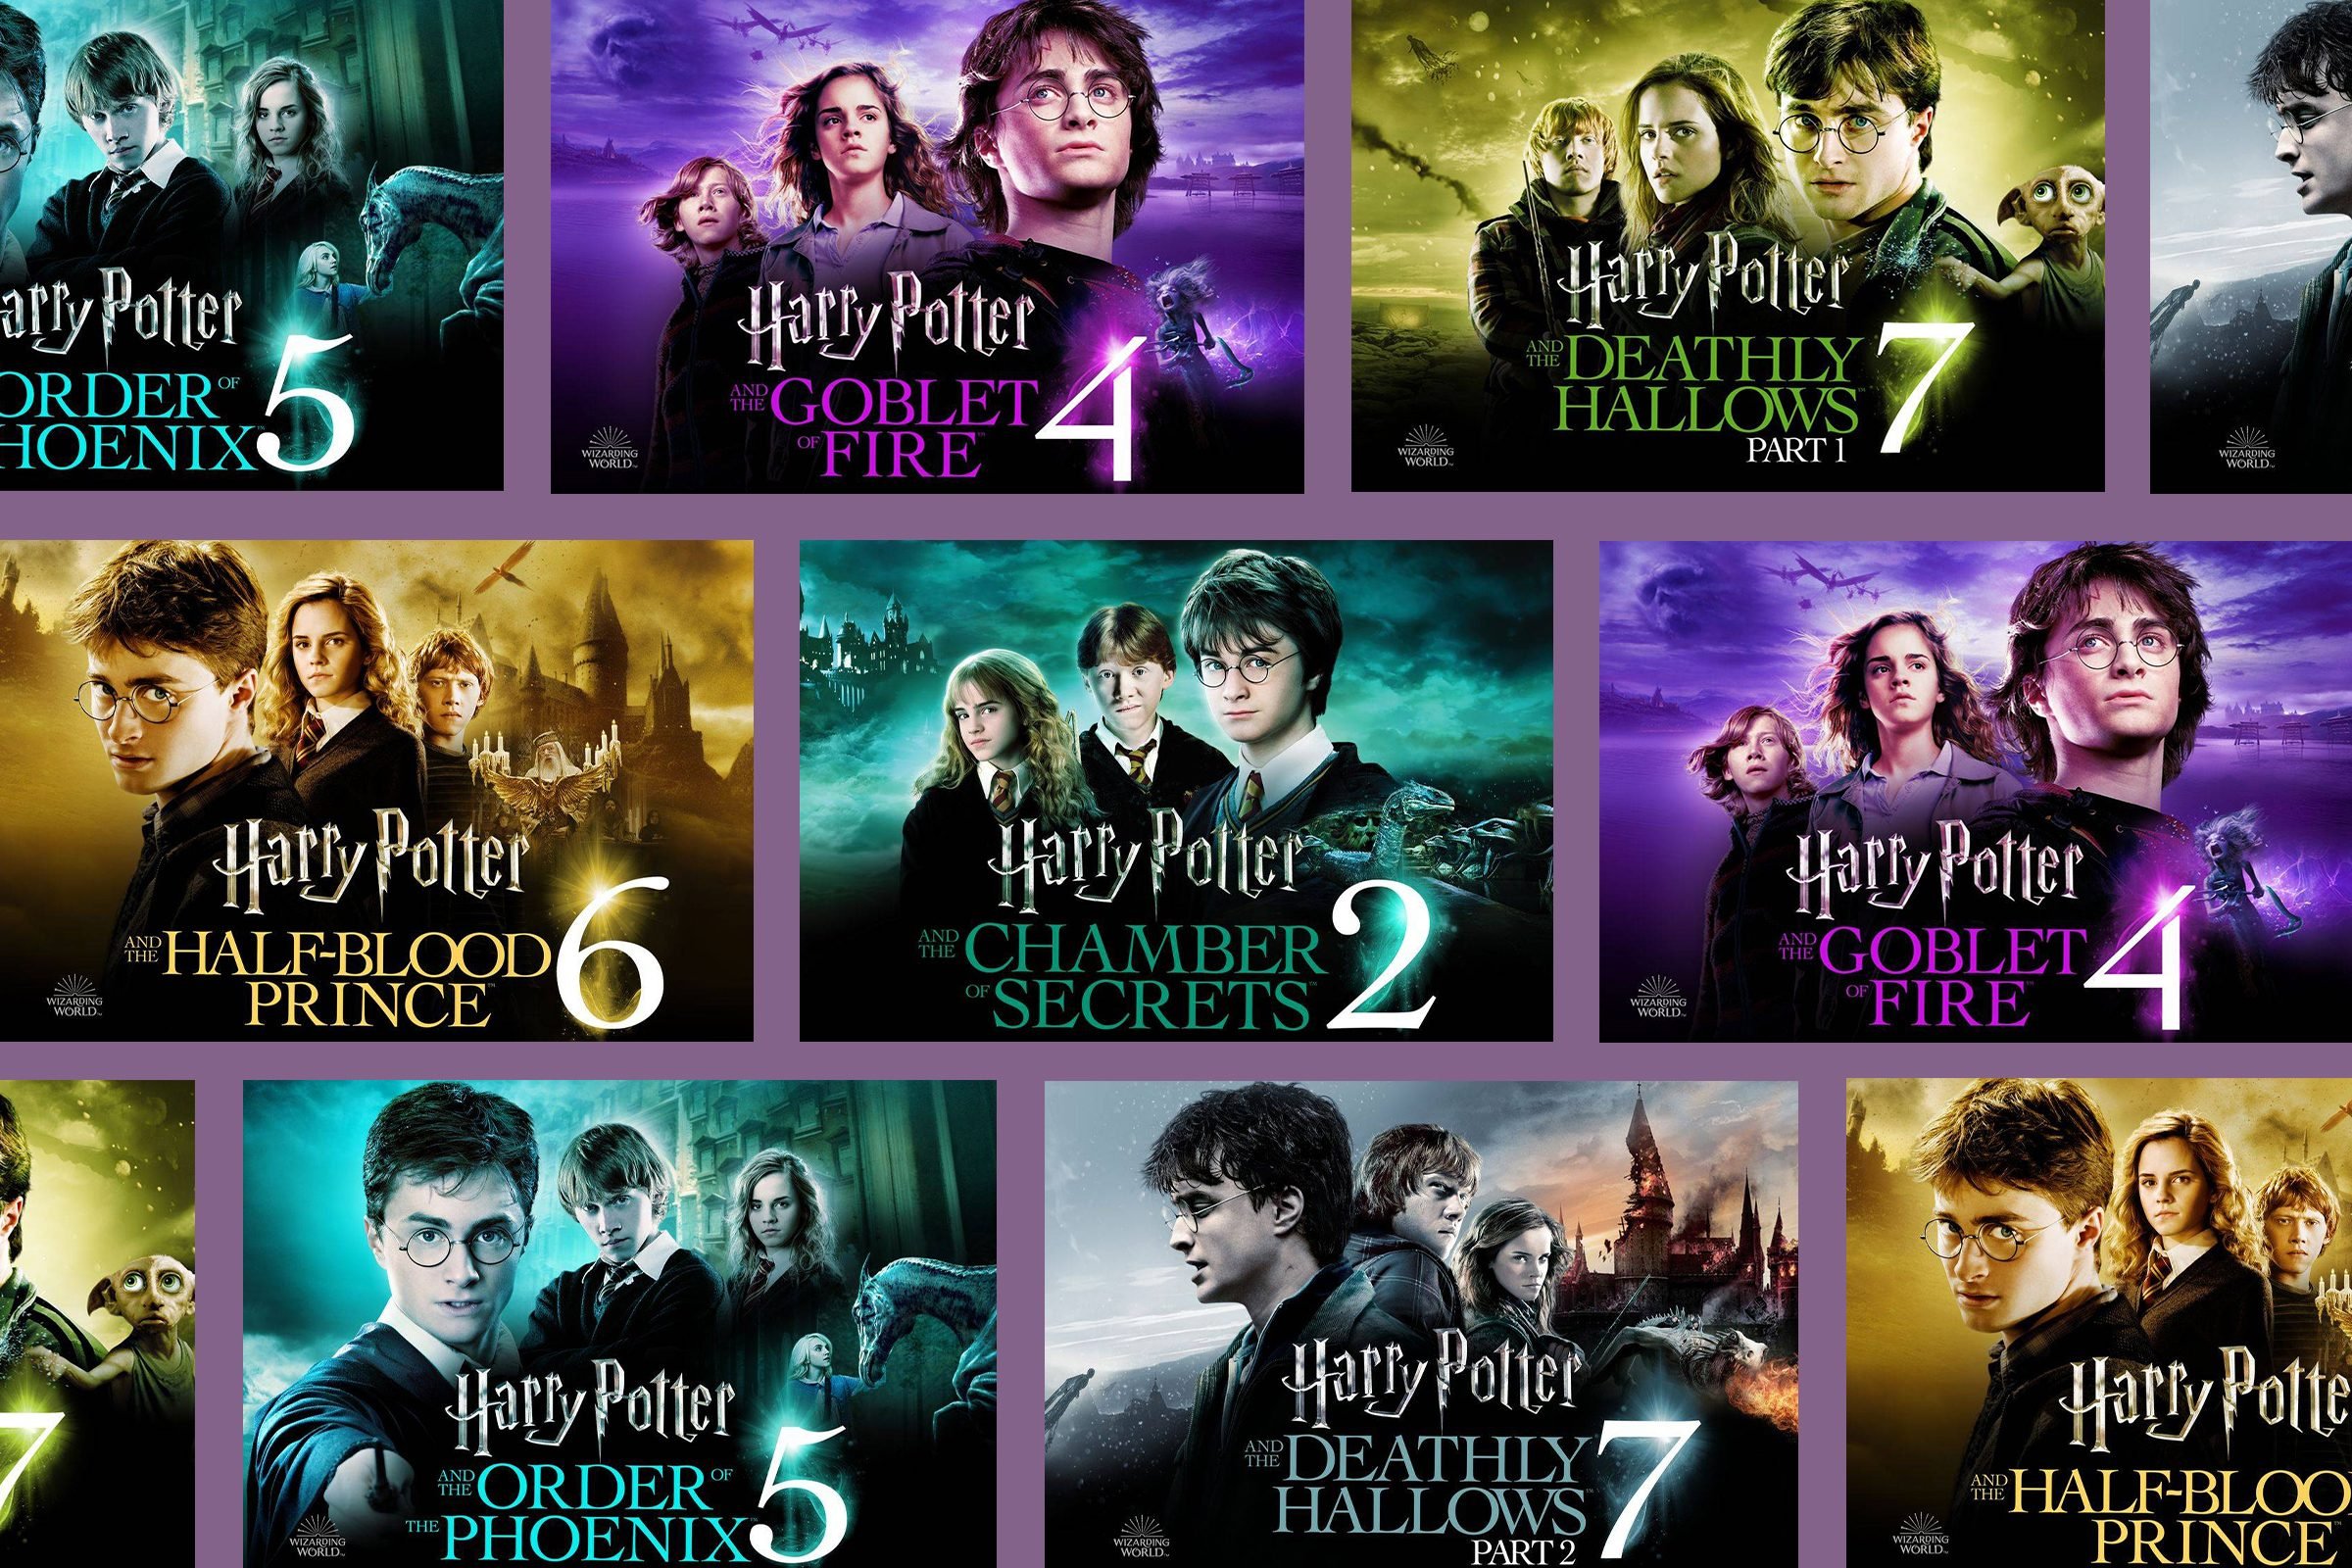 How many Harry Potter movies are there in total?